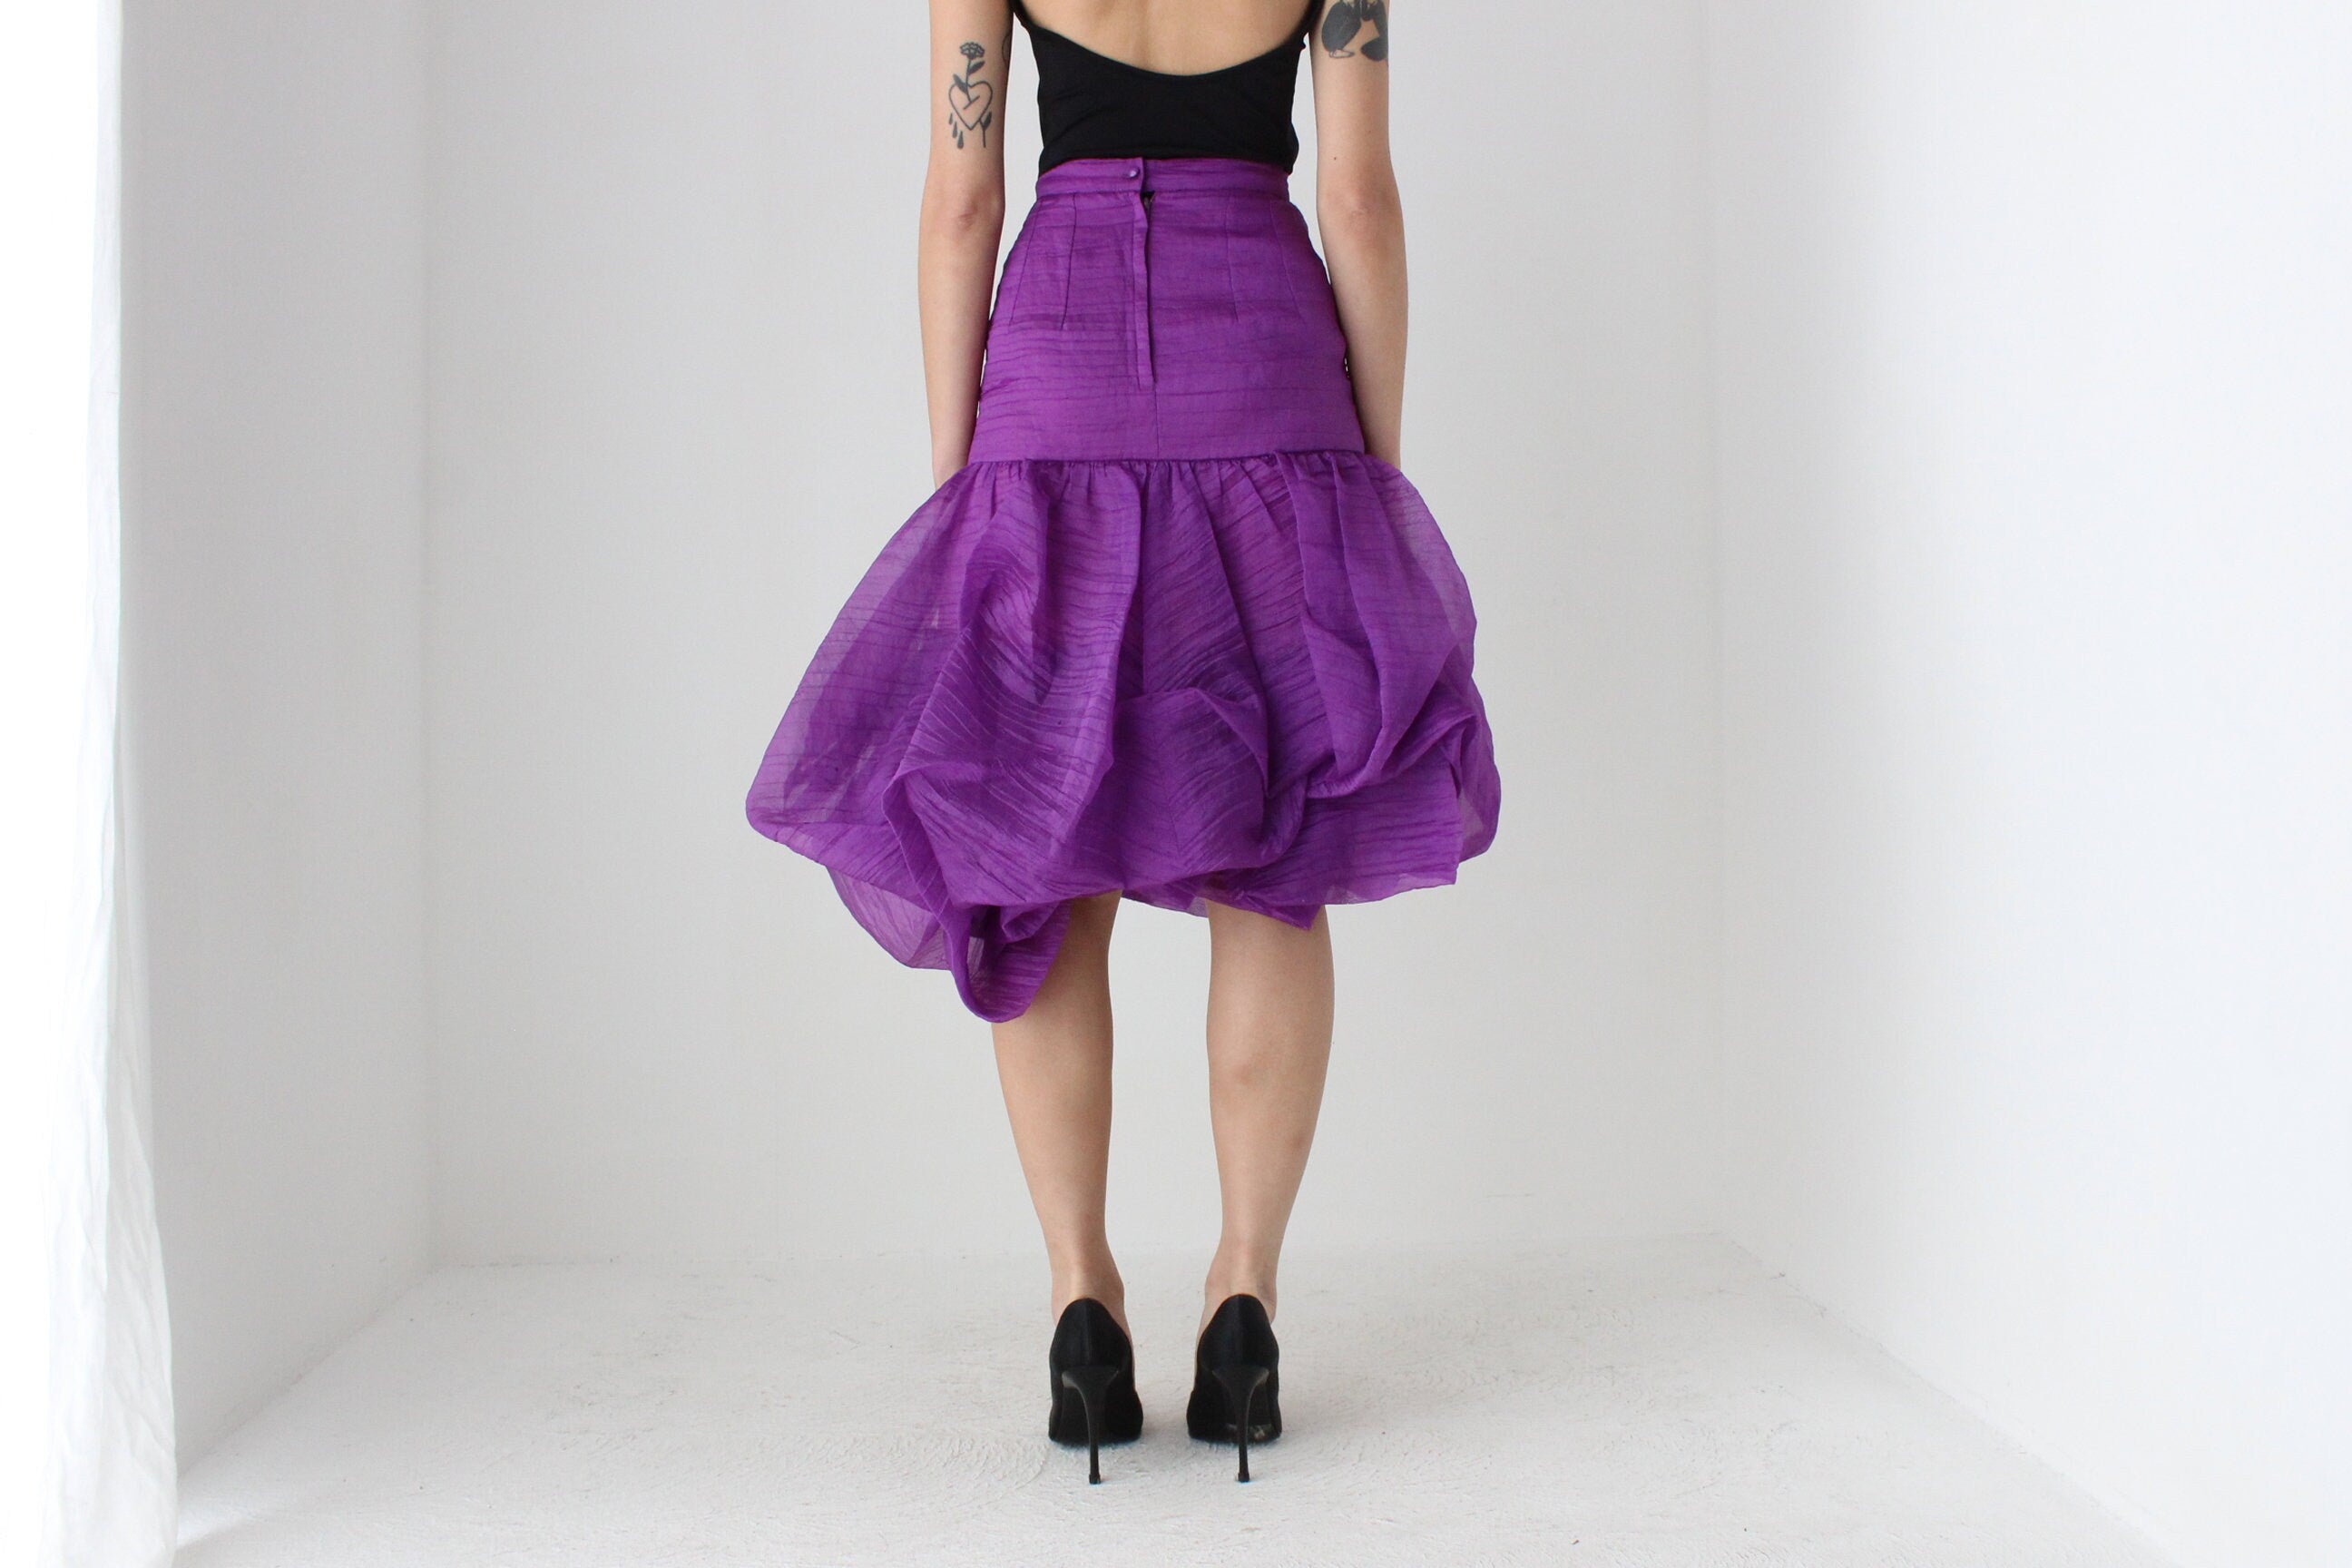 INSANE 80s 'Harry Who' Sculptural Puff Bubble Skirt